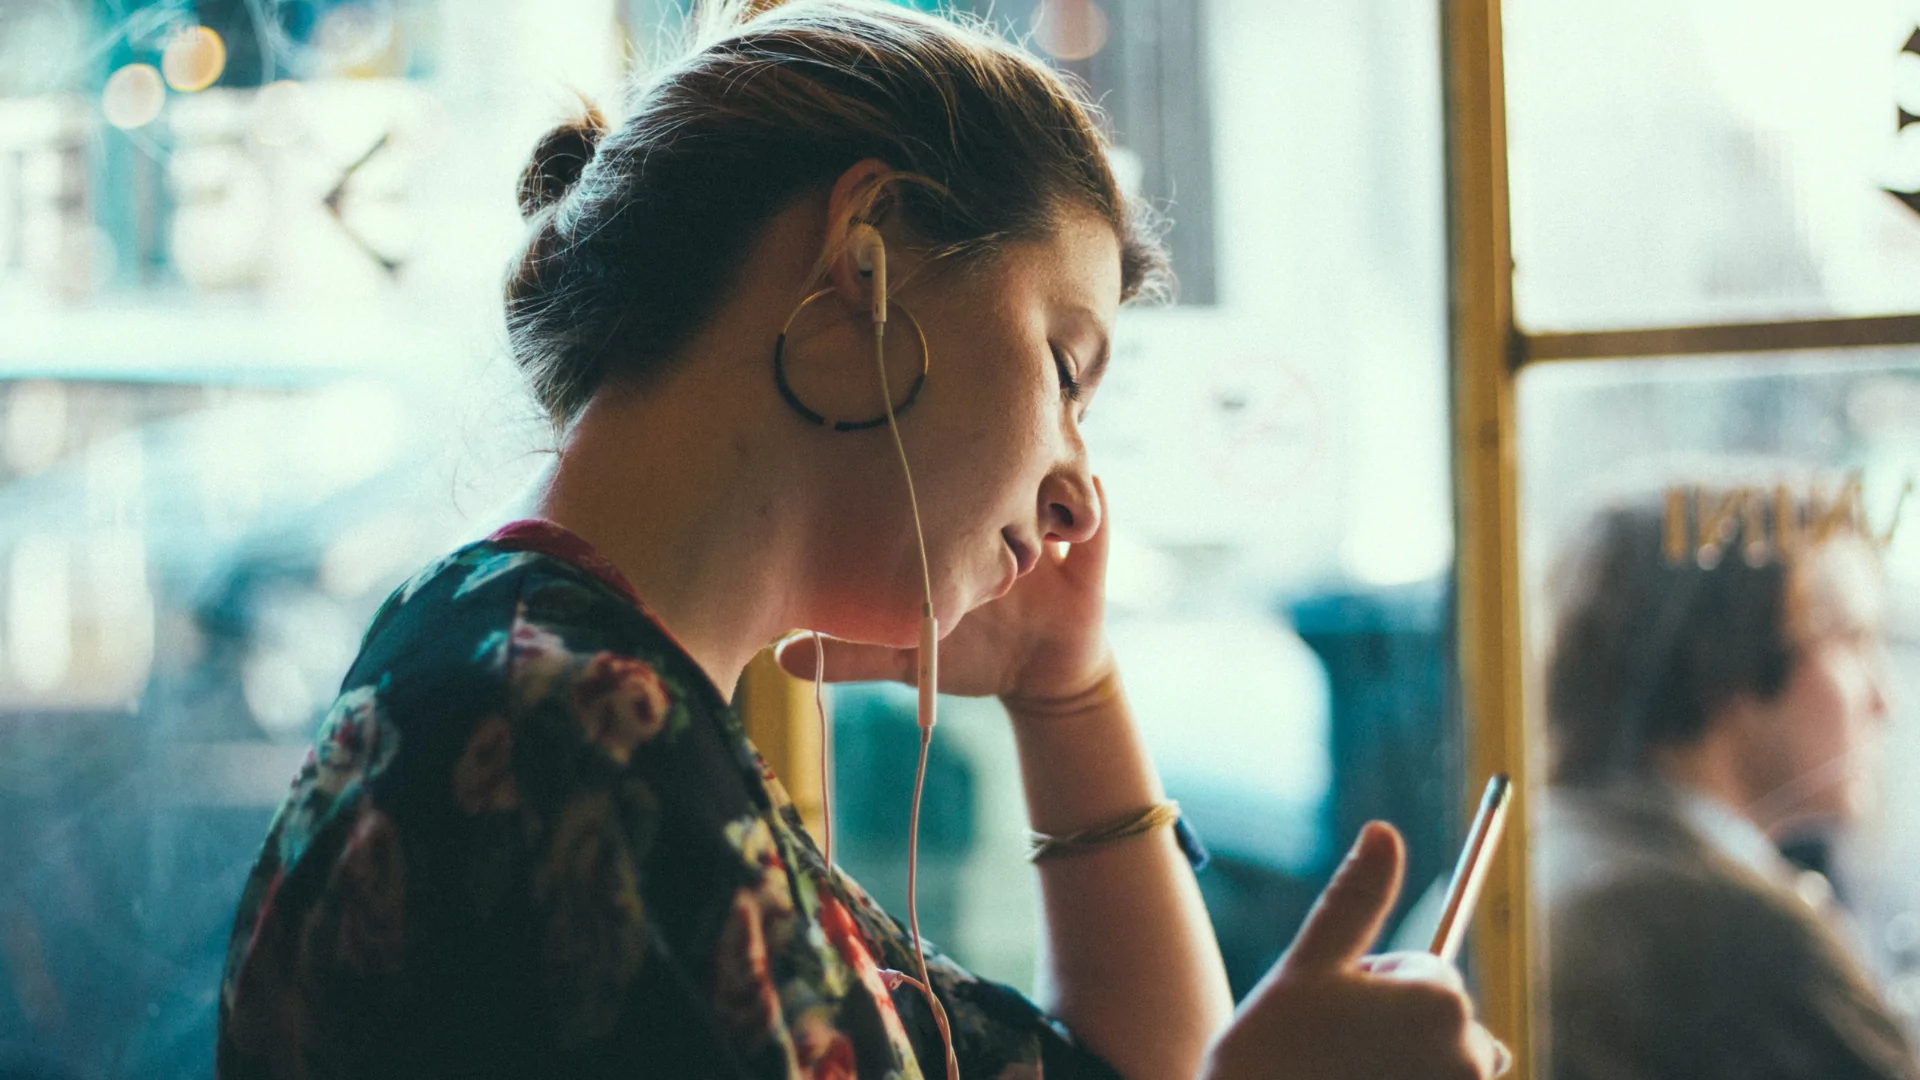 How to get into listening to audiobooks in 7 easy steps